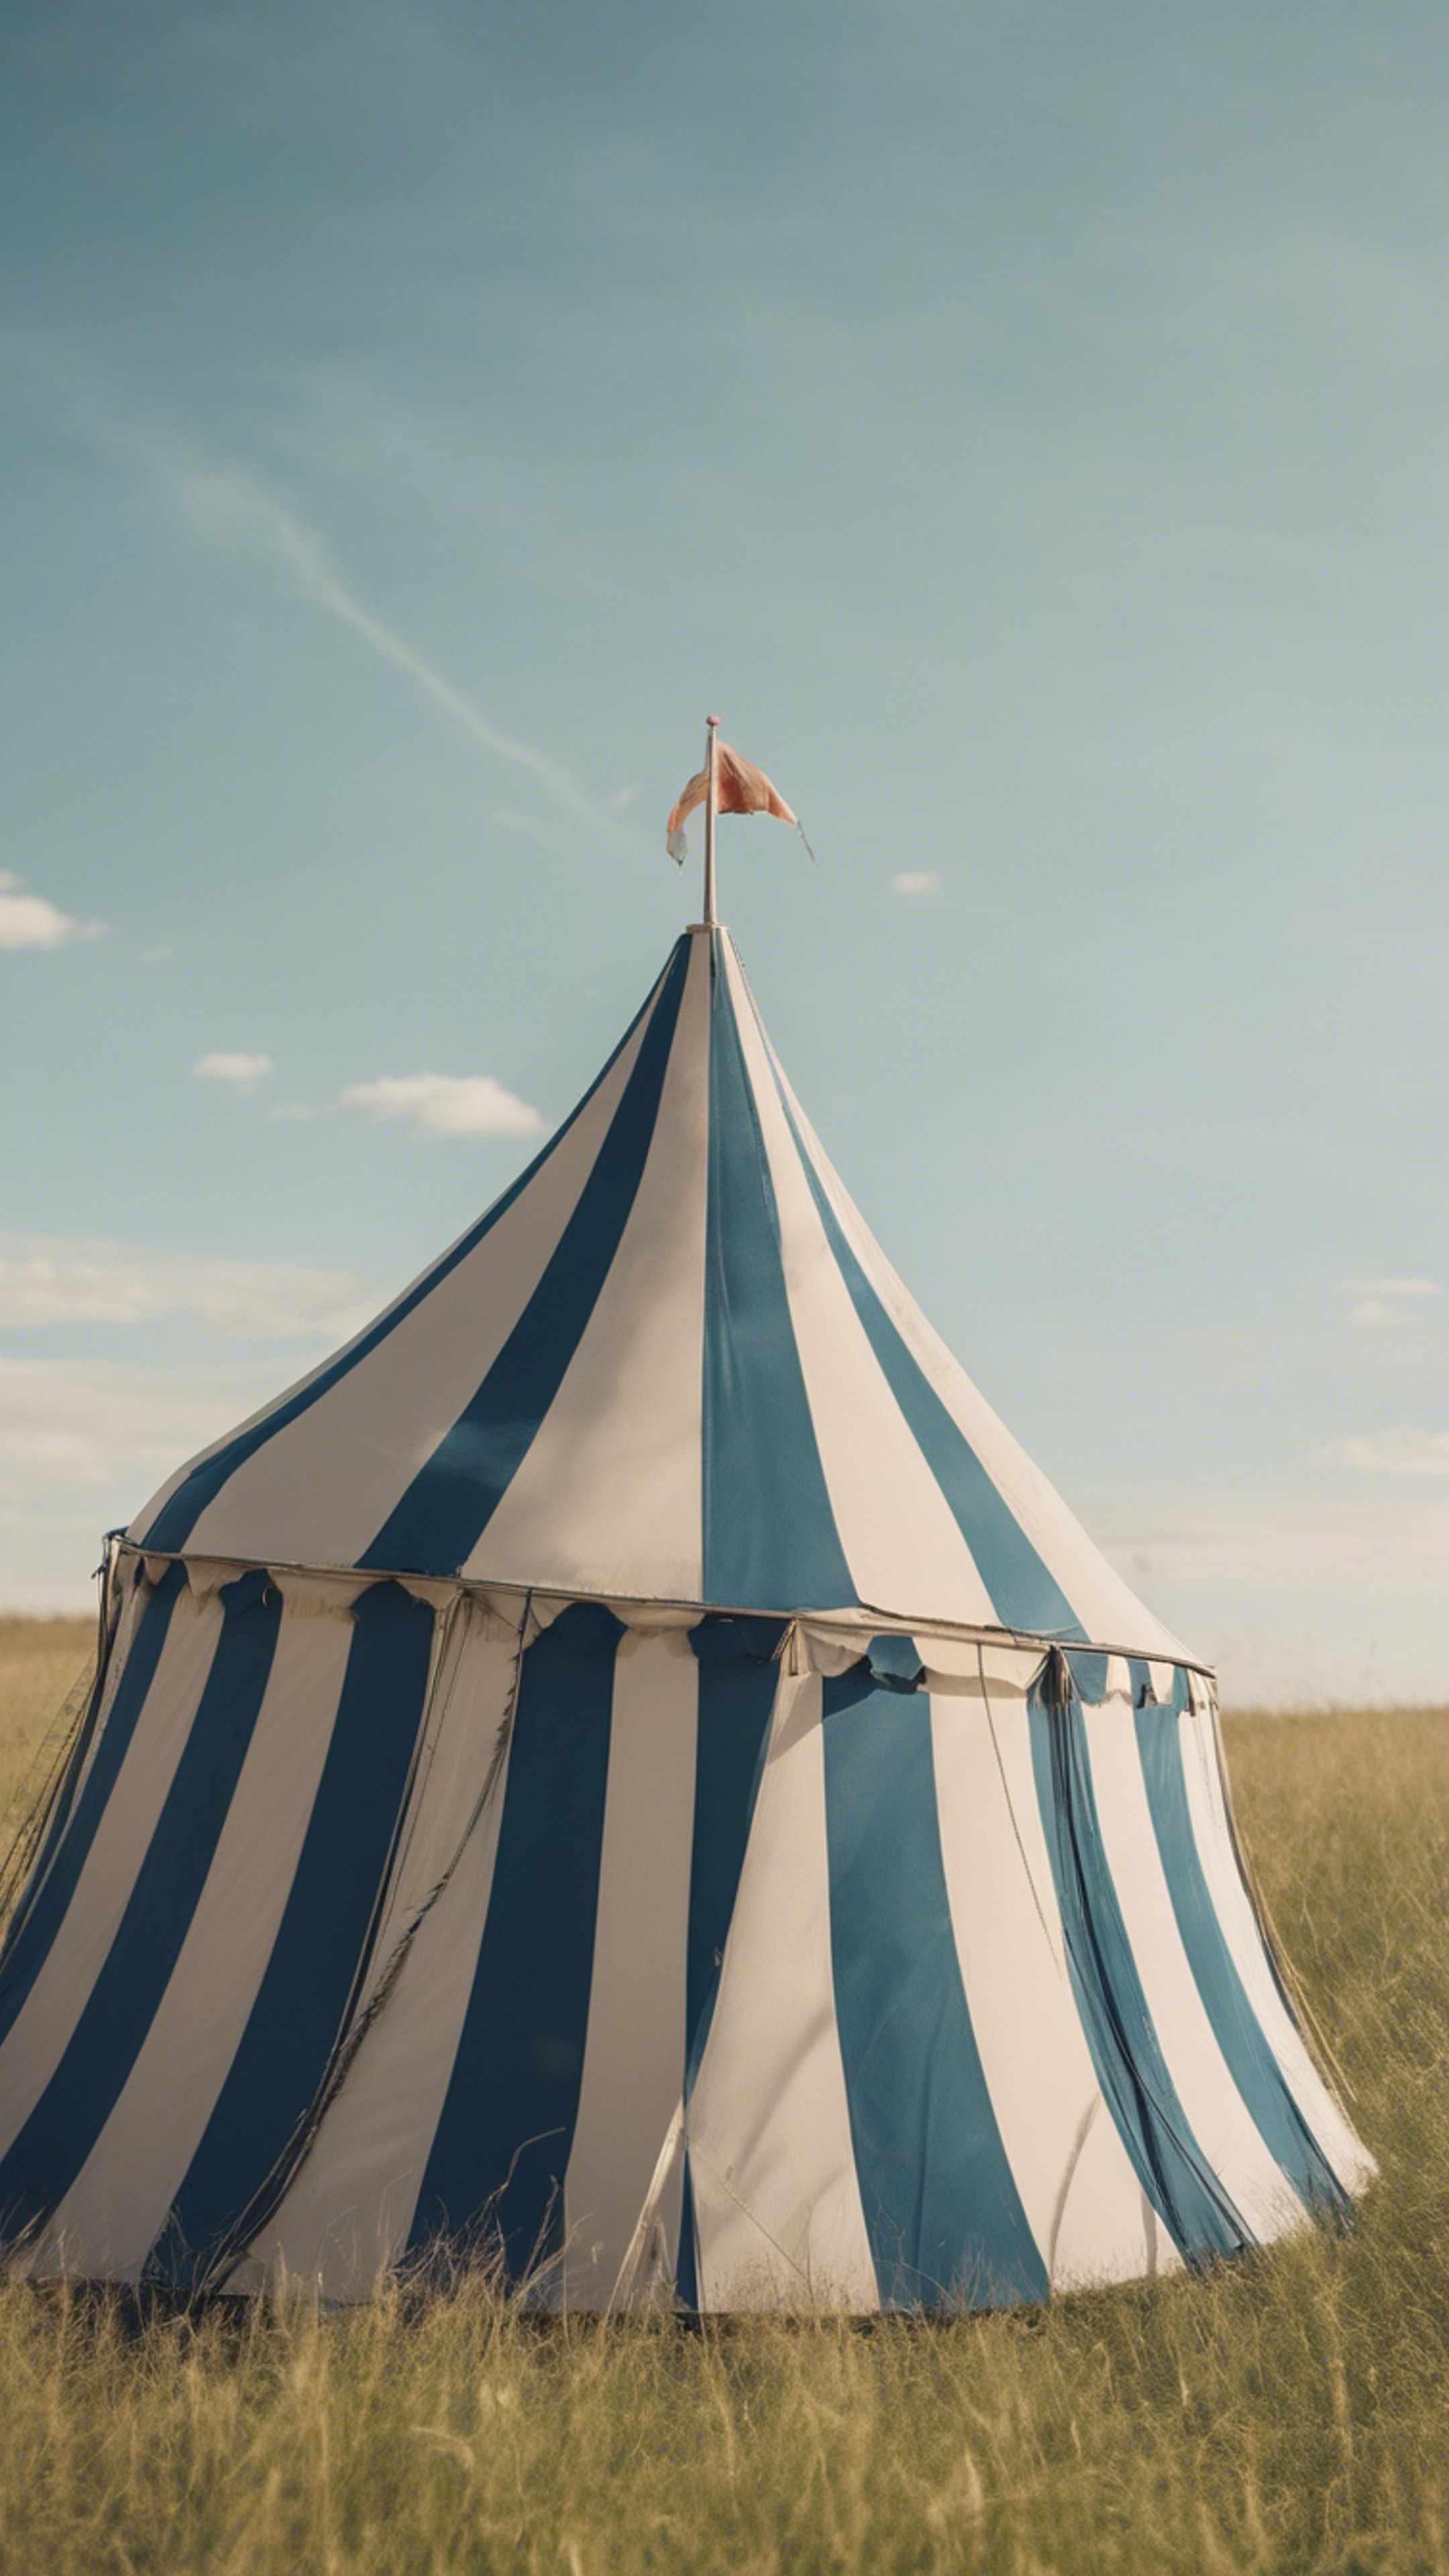 A vintage striped circus tent in a grassy field with a blue sky overhead. Tapeta na zeď[07d58b74cbfe41aa8350]